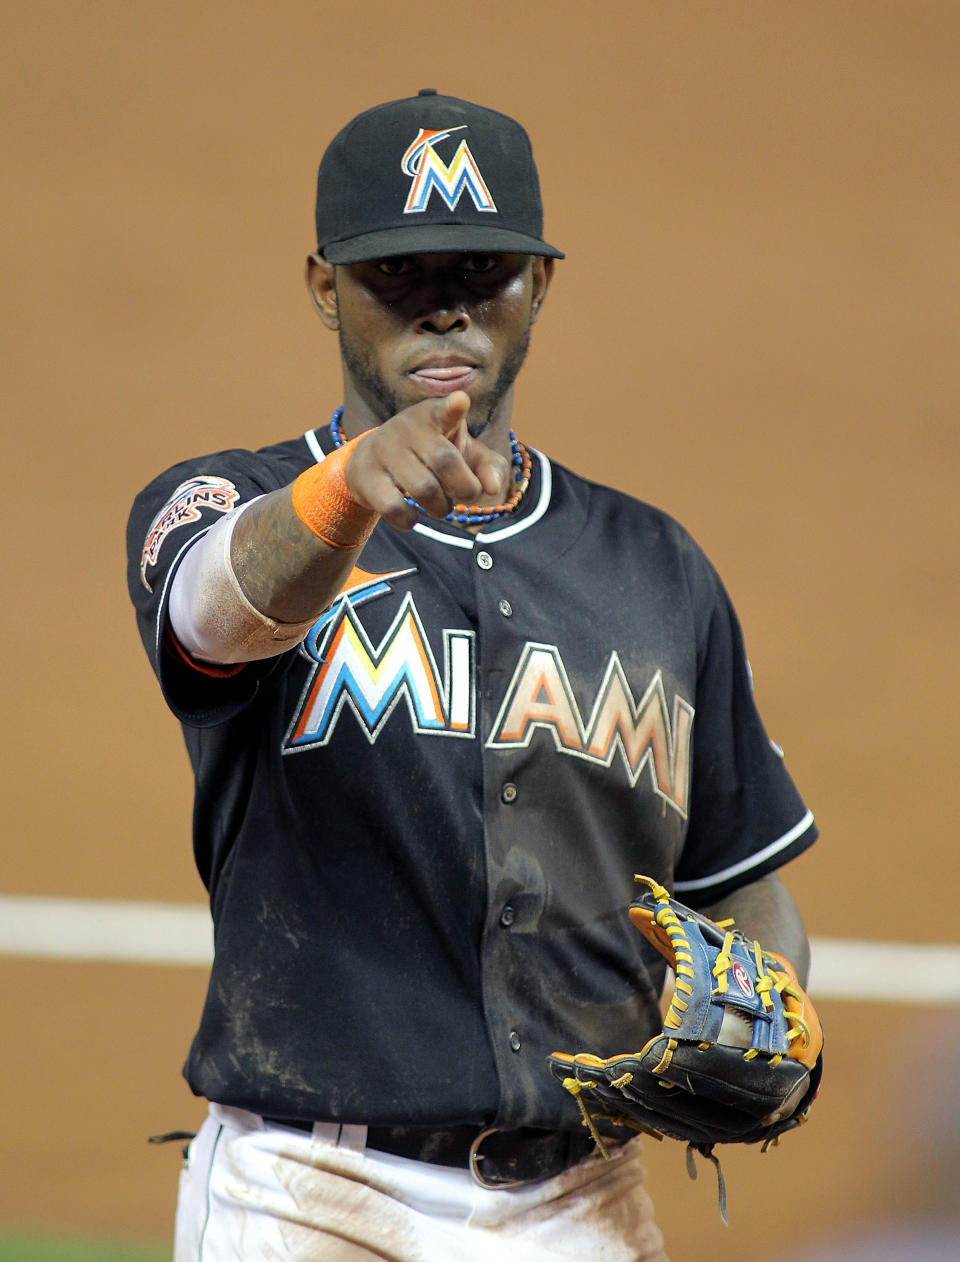 MIAMI, FL - APRIL 13: Shortstop Jose Reyes #7 of the Miami Marlins points to a fan during a game against the Houston Astros at Marlins Park on April 13, 2012 in Miami, Florida. (Photo by Marc Serota/Getty Images)